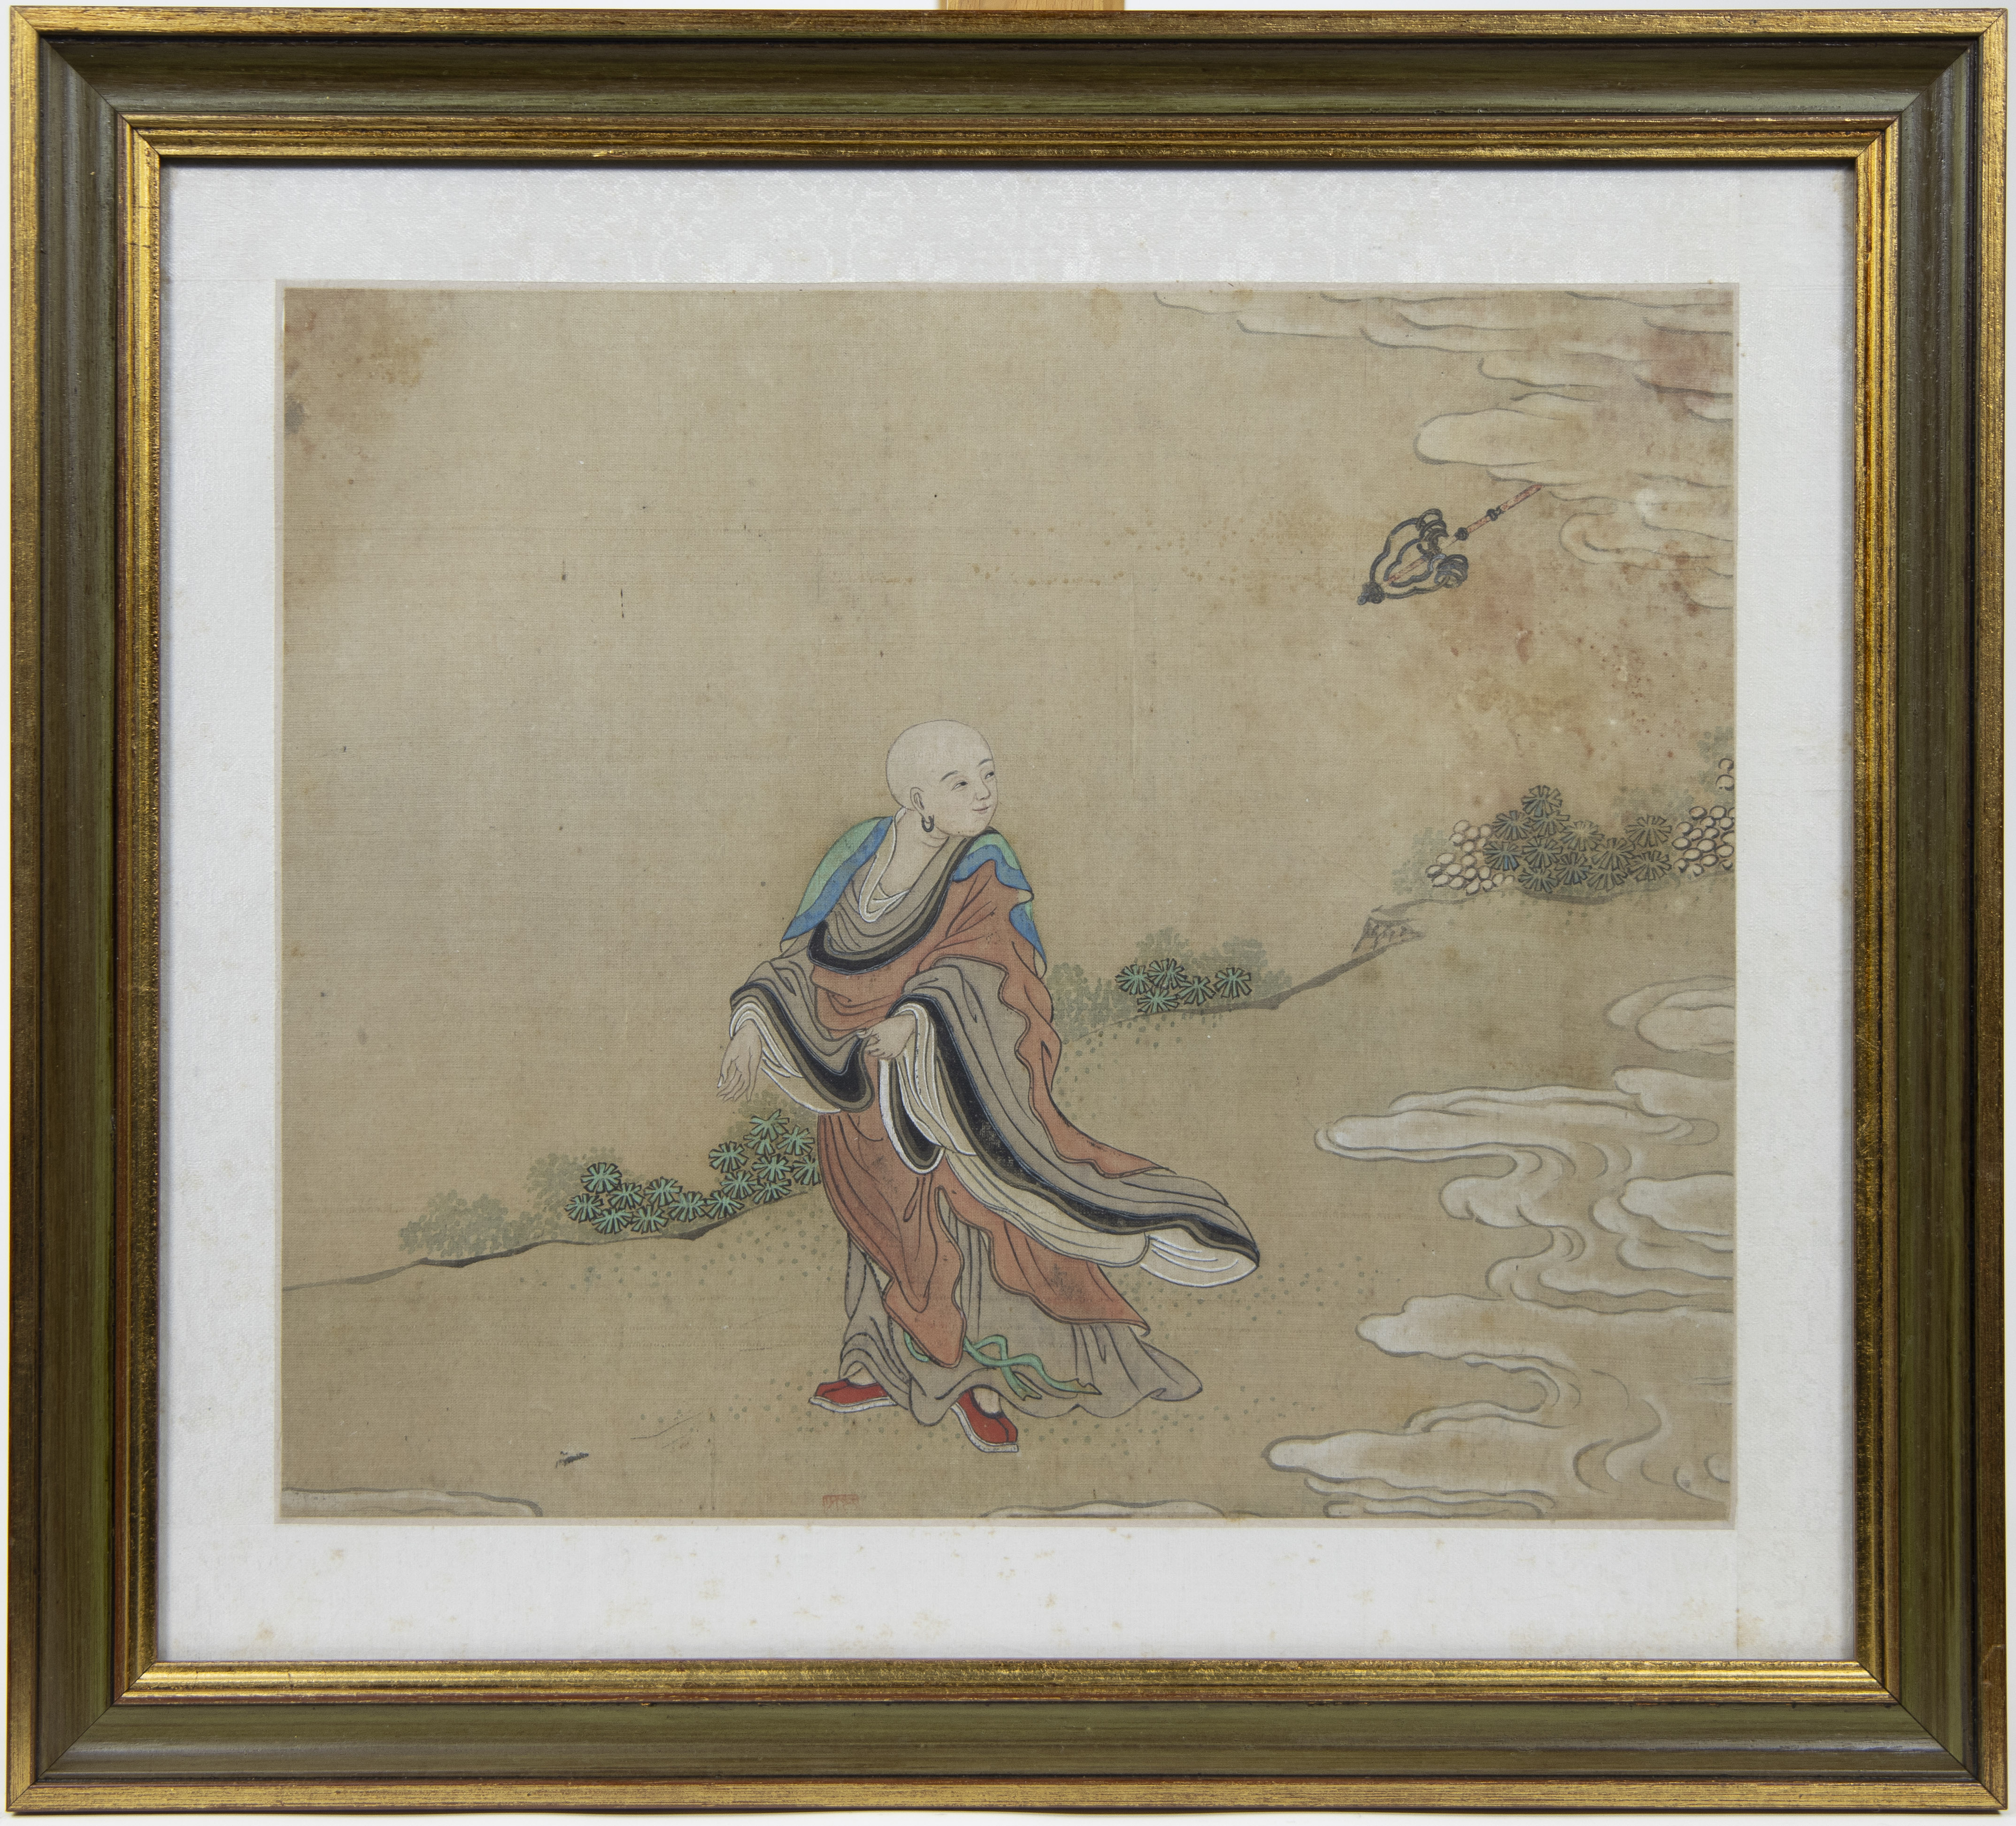 Set of 13 Chinese coloured drawings on silk, 19th century, some are signed - Image 9 of 17